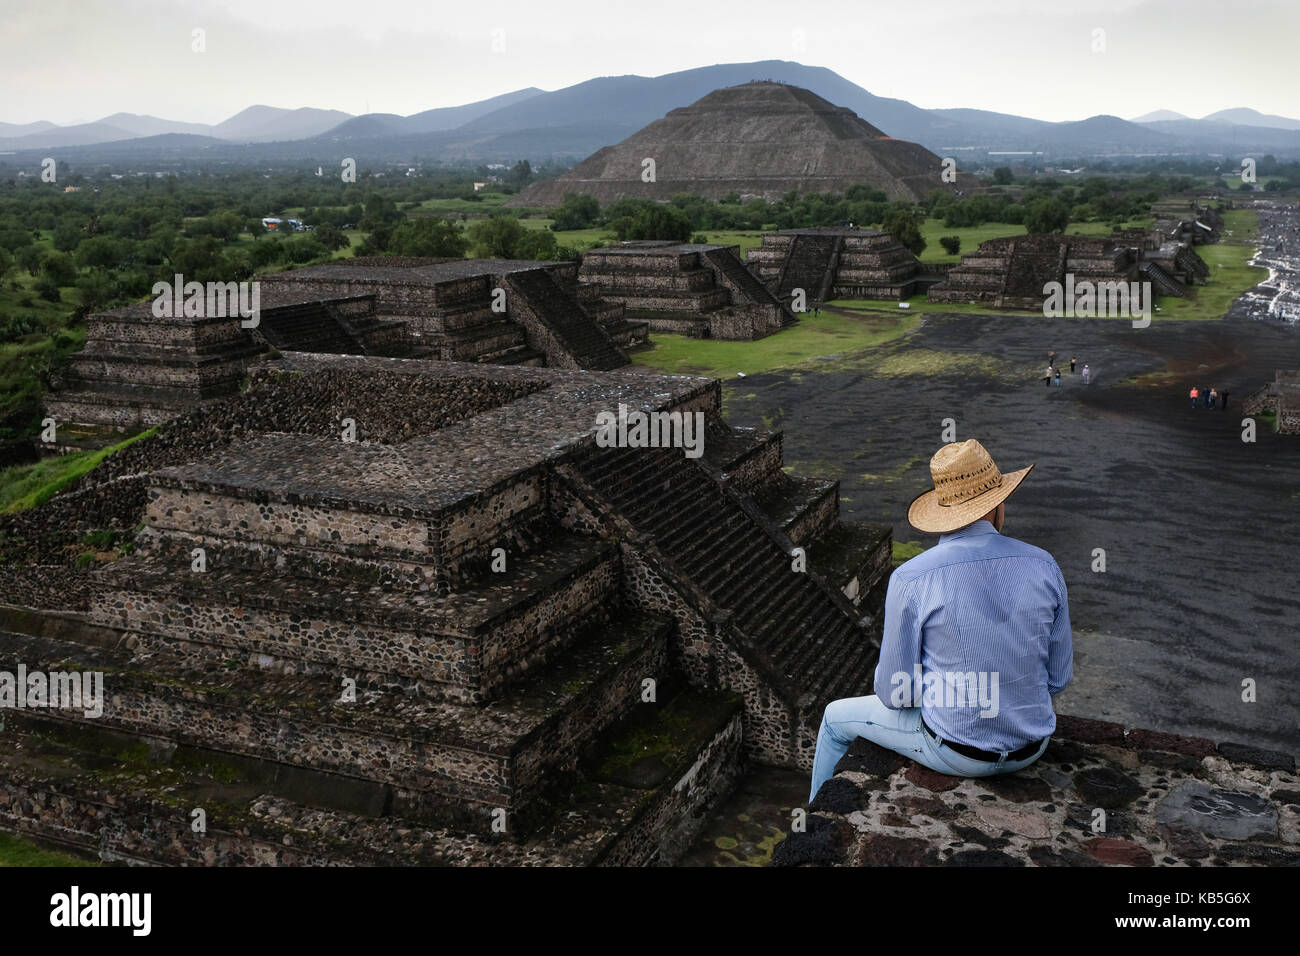 A man sits on a ledge looking over Teotihuacán, an ancient Mesoamerican city located in a sub-valley of the Valley of Mexico. Stock Photo